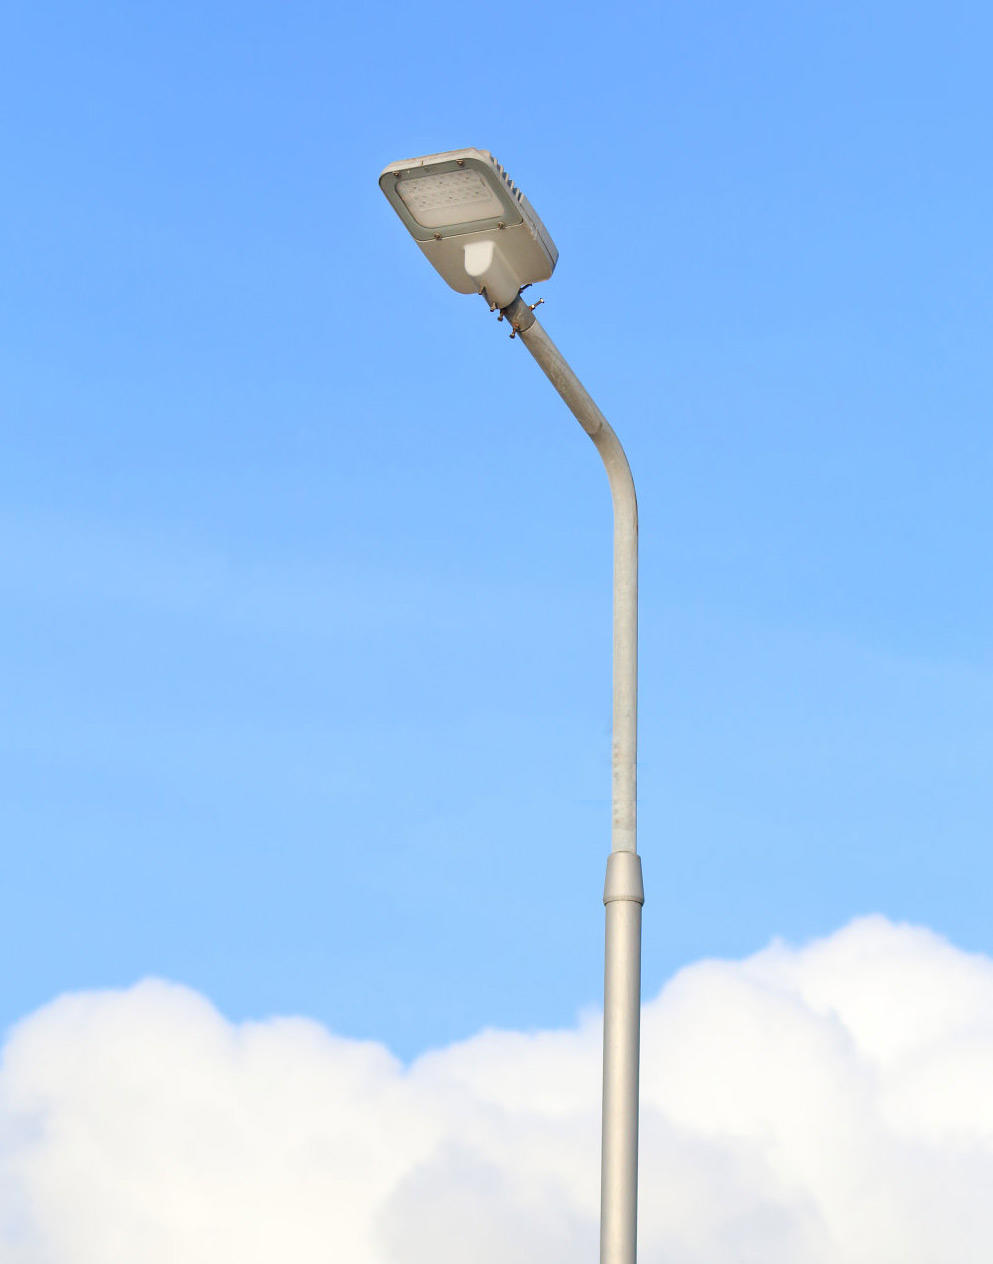 ALLTOP solar powered street lights factory suppliers for high road